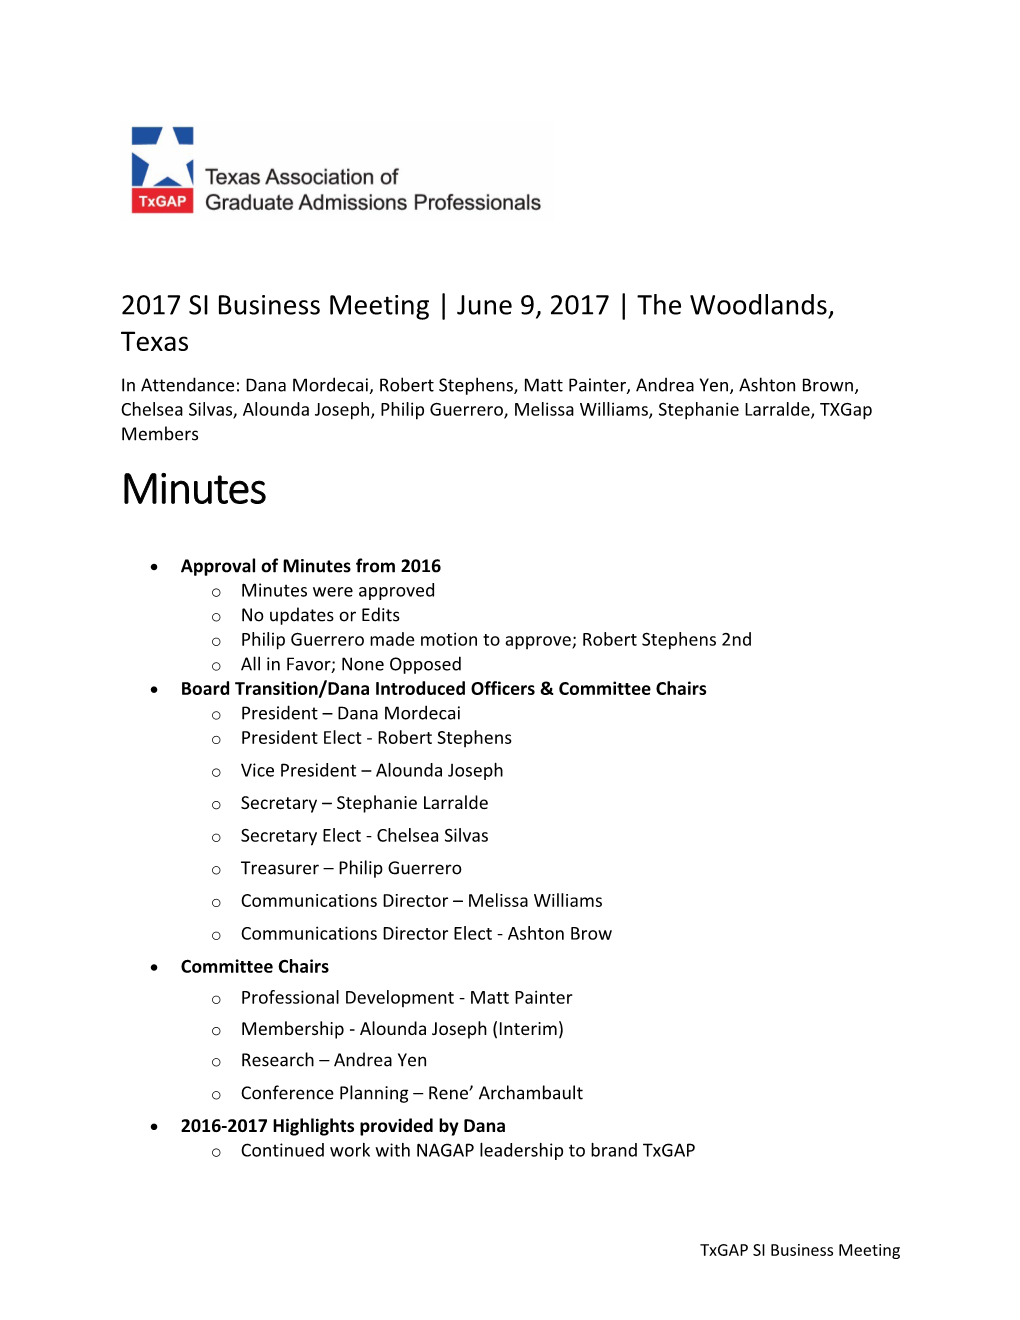 2017 SI Business Meeting June 9, 2017 the Woodlands, Texas